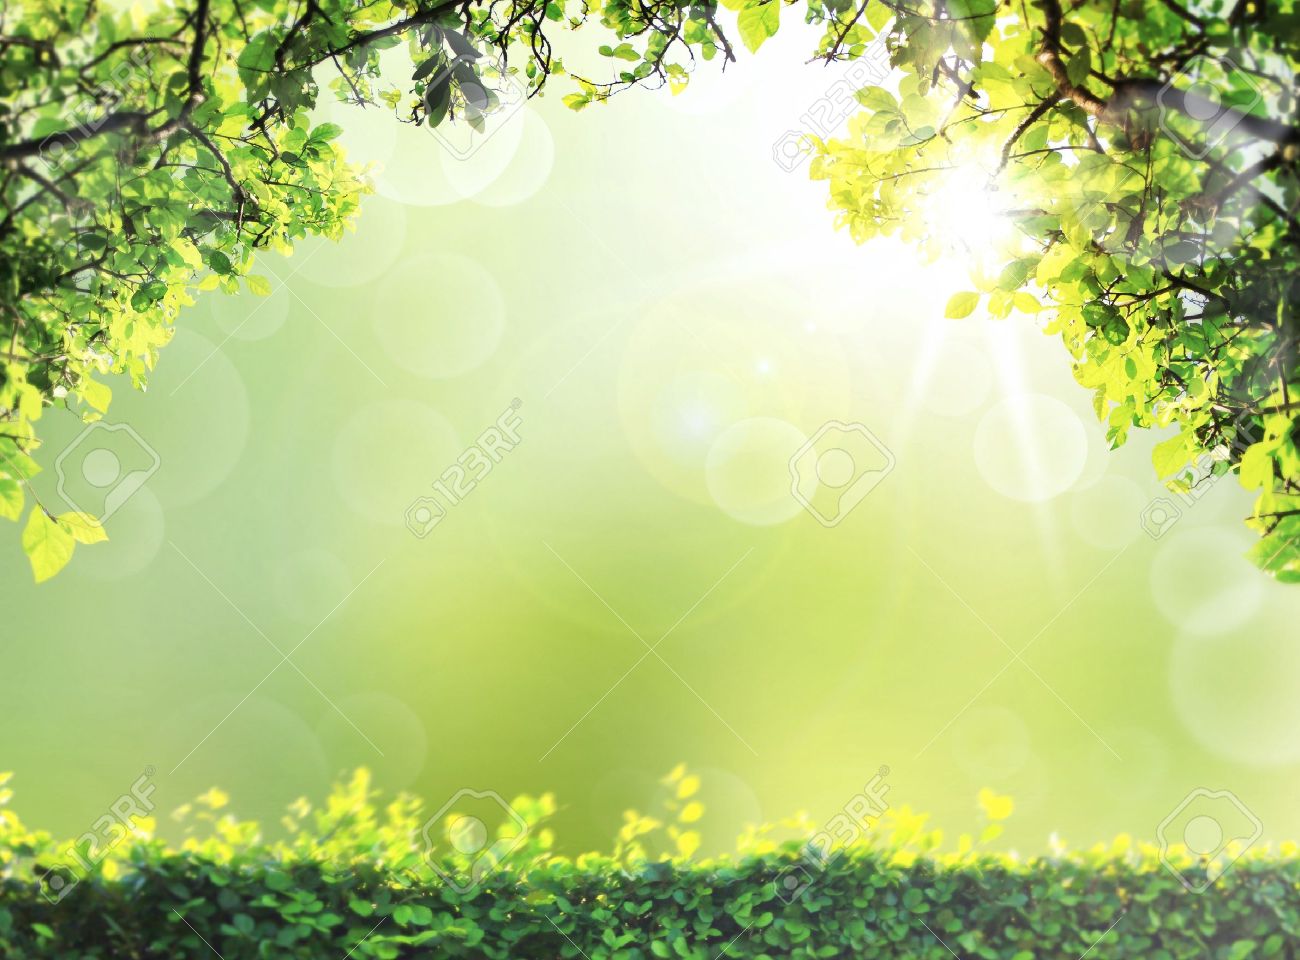 Natural Green Spring Or Summer Season Abstract Nature Background 1300x960